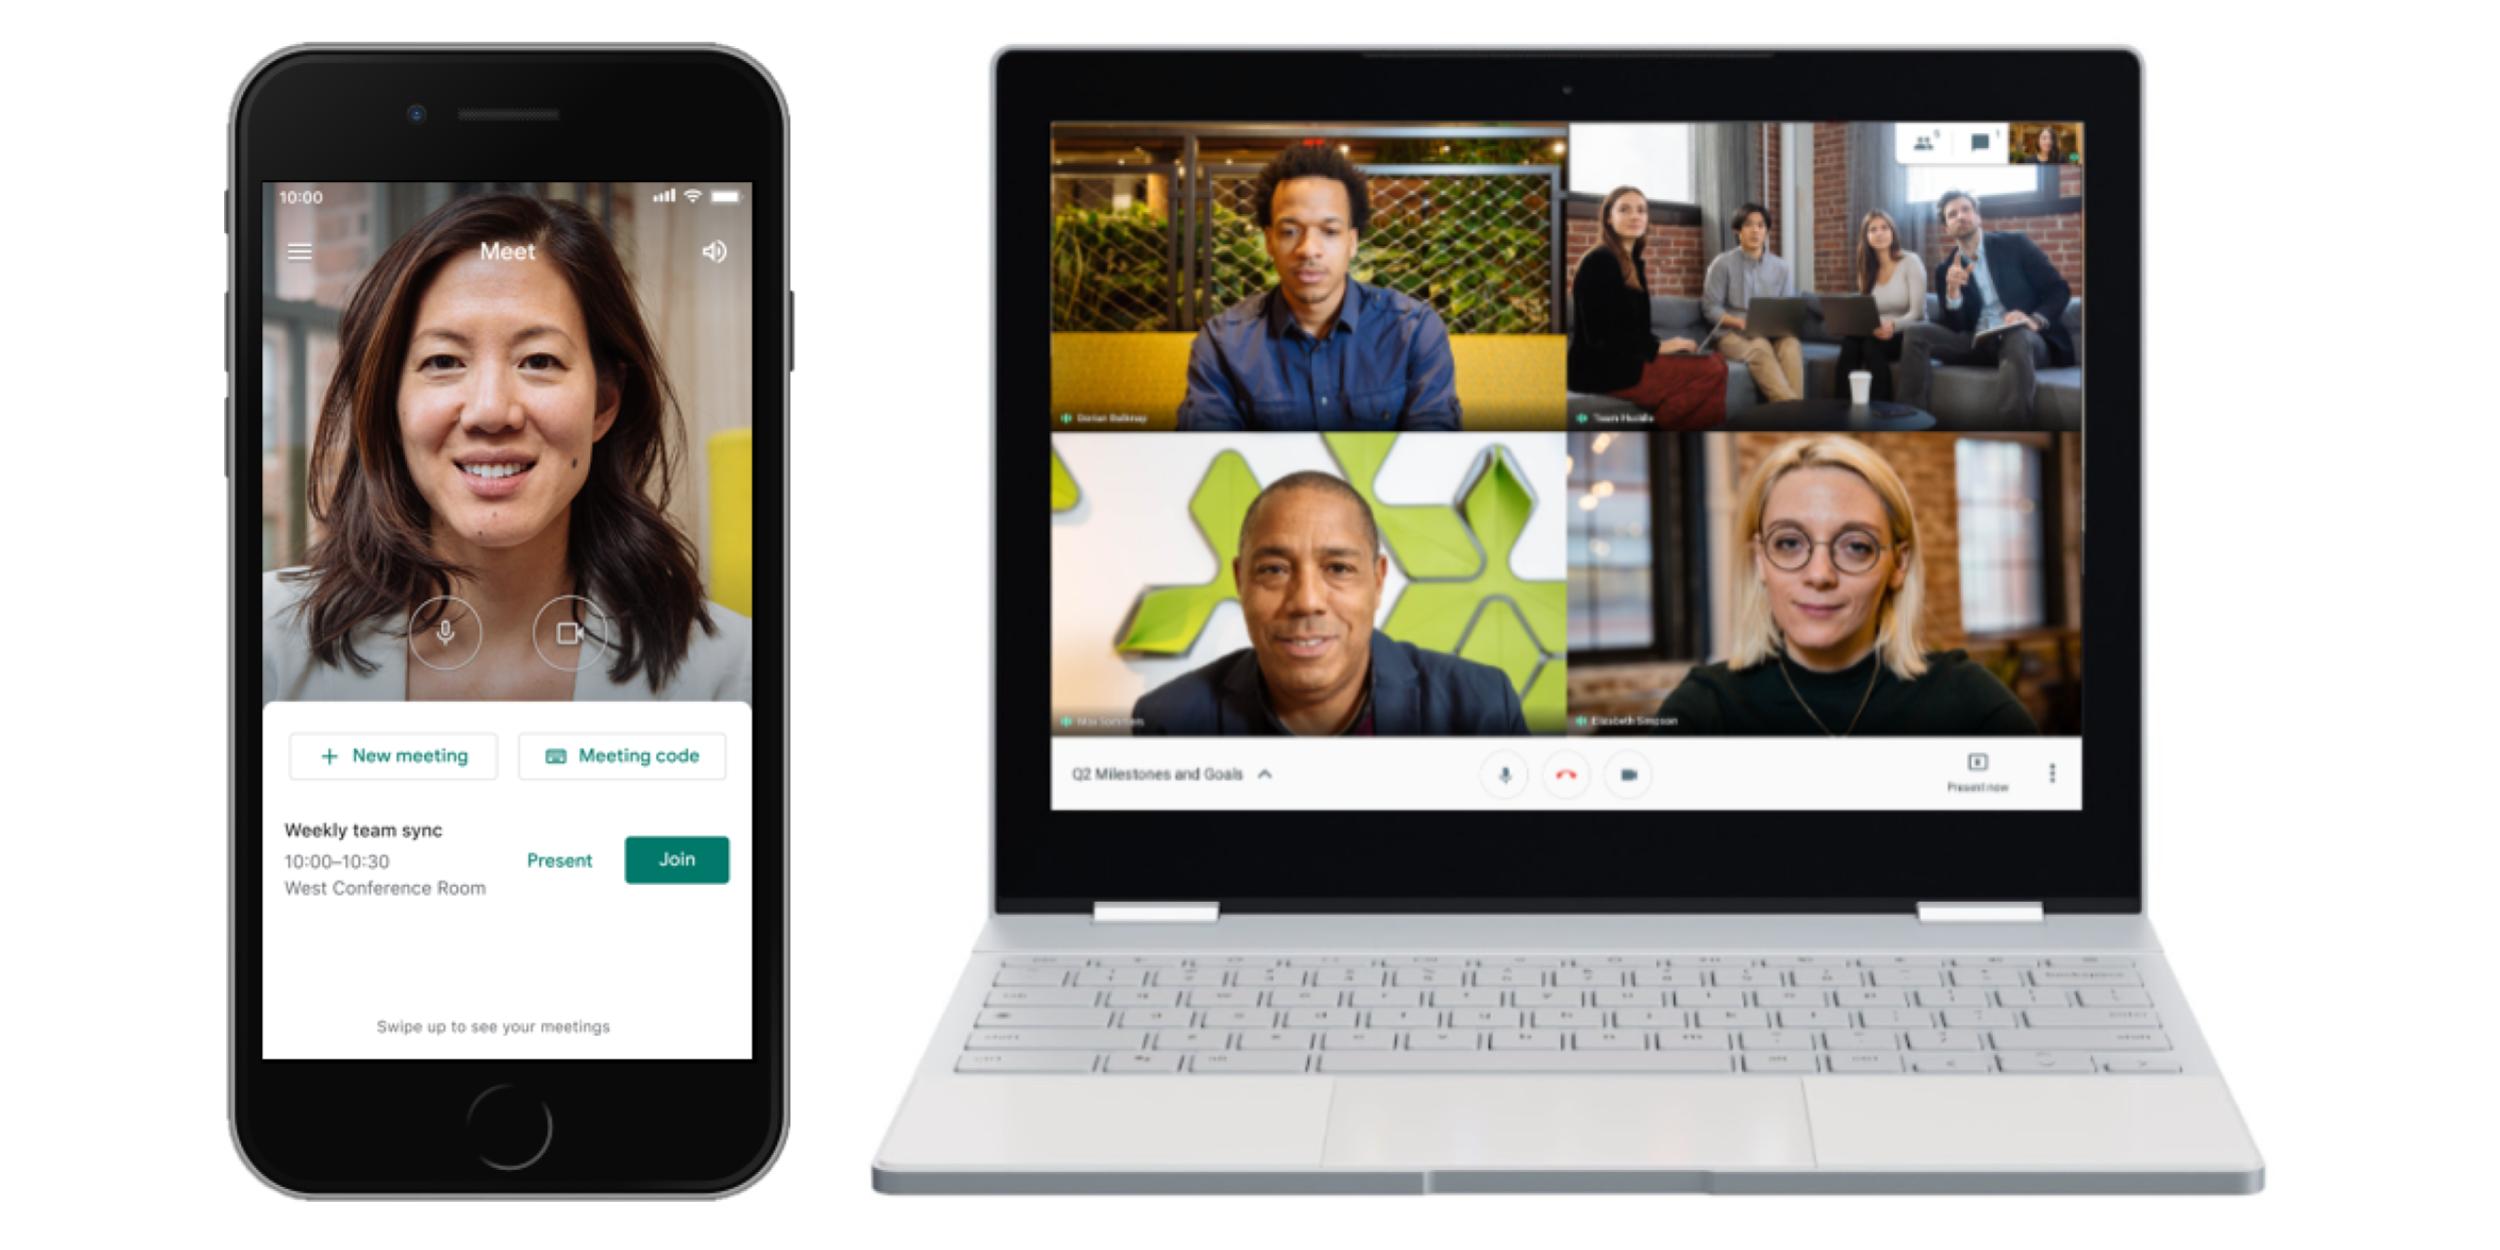 Google Meet Gets First Ad Showing How Its Free For Everyone